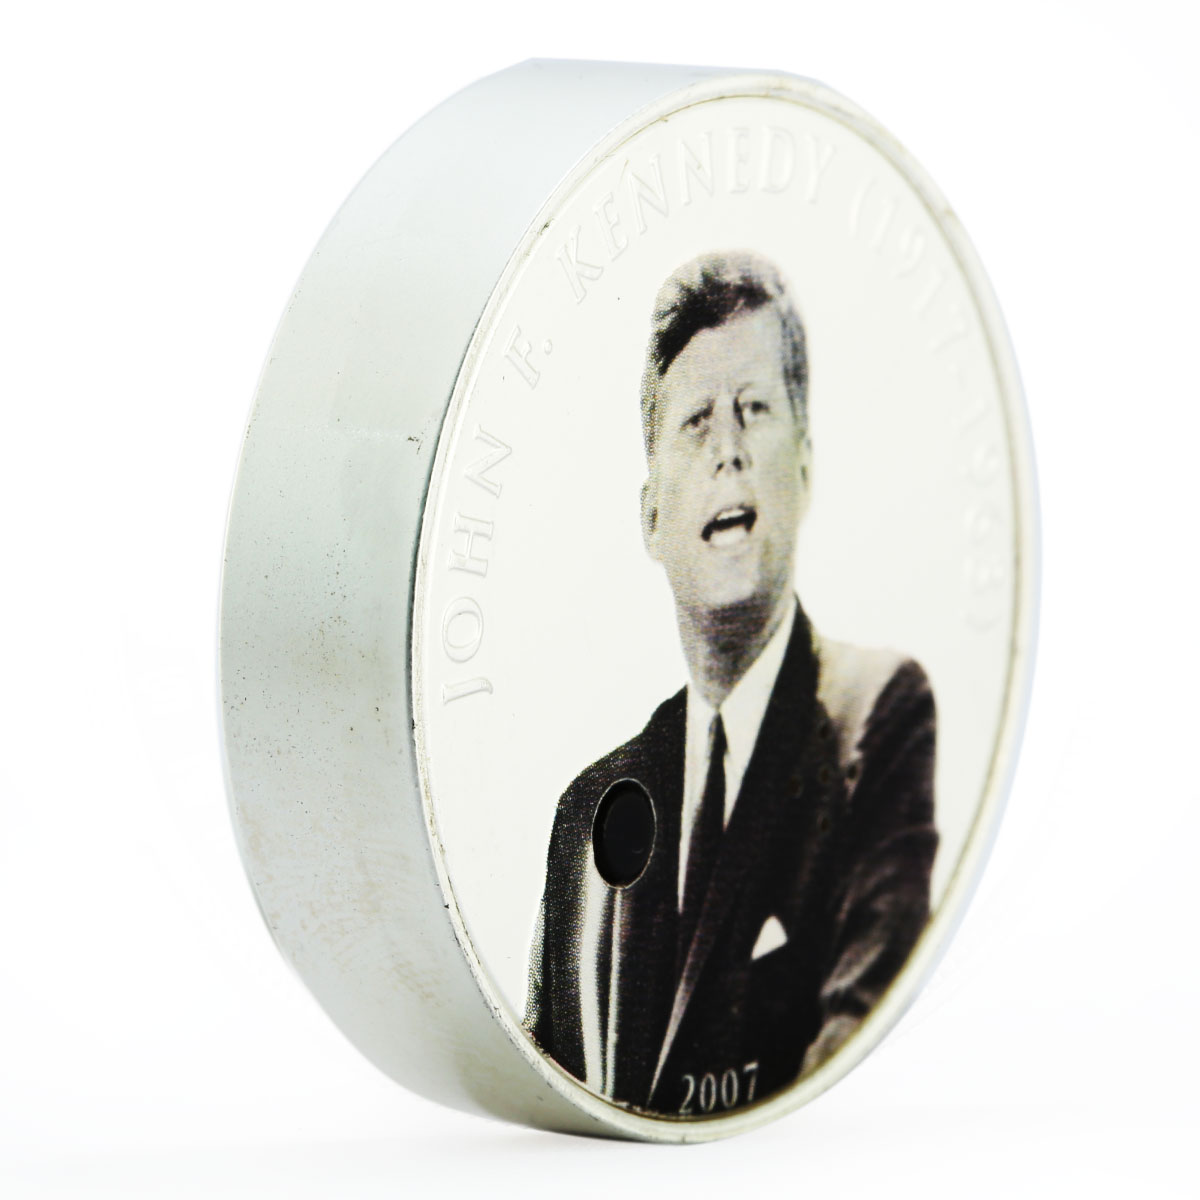 Mongolia 500 togrog Famous Politicians series John F. Kennedy silver coin 2007